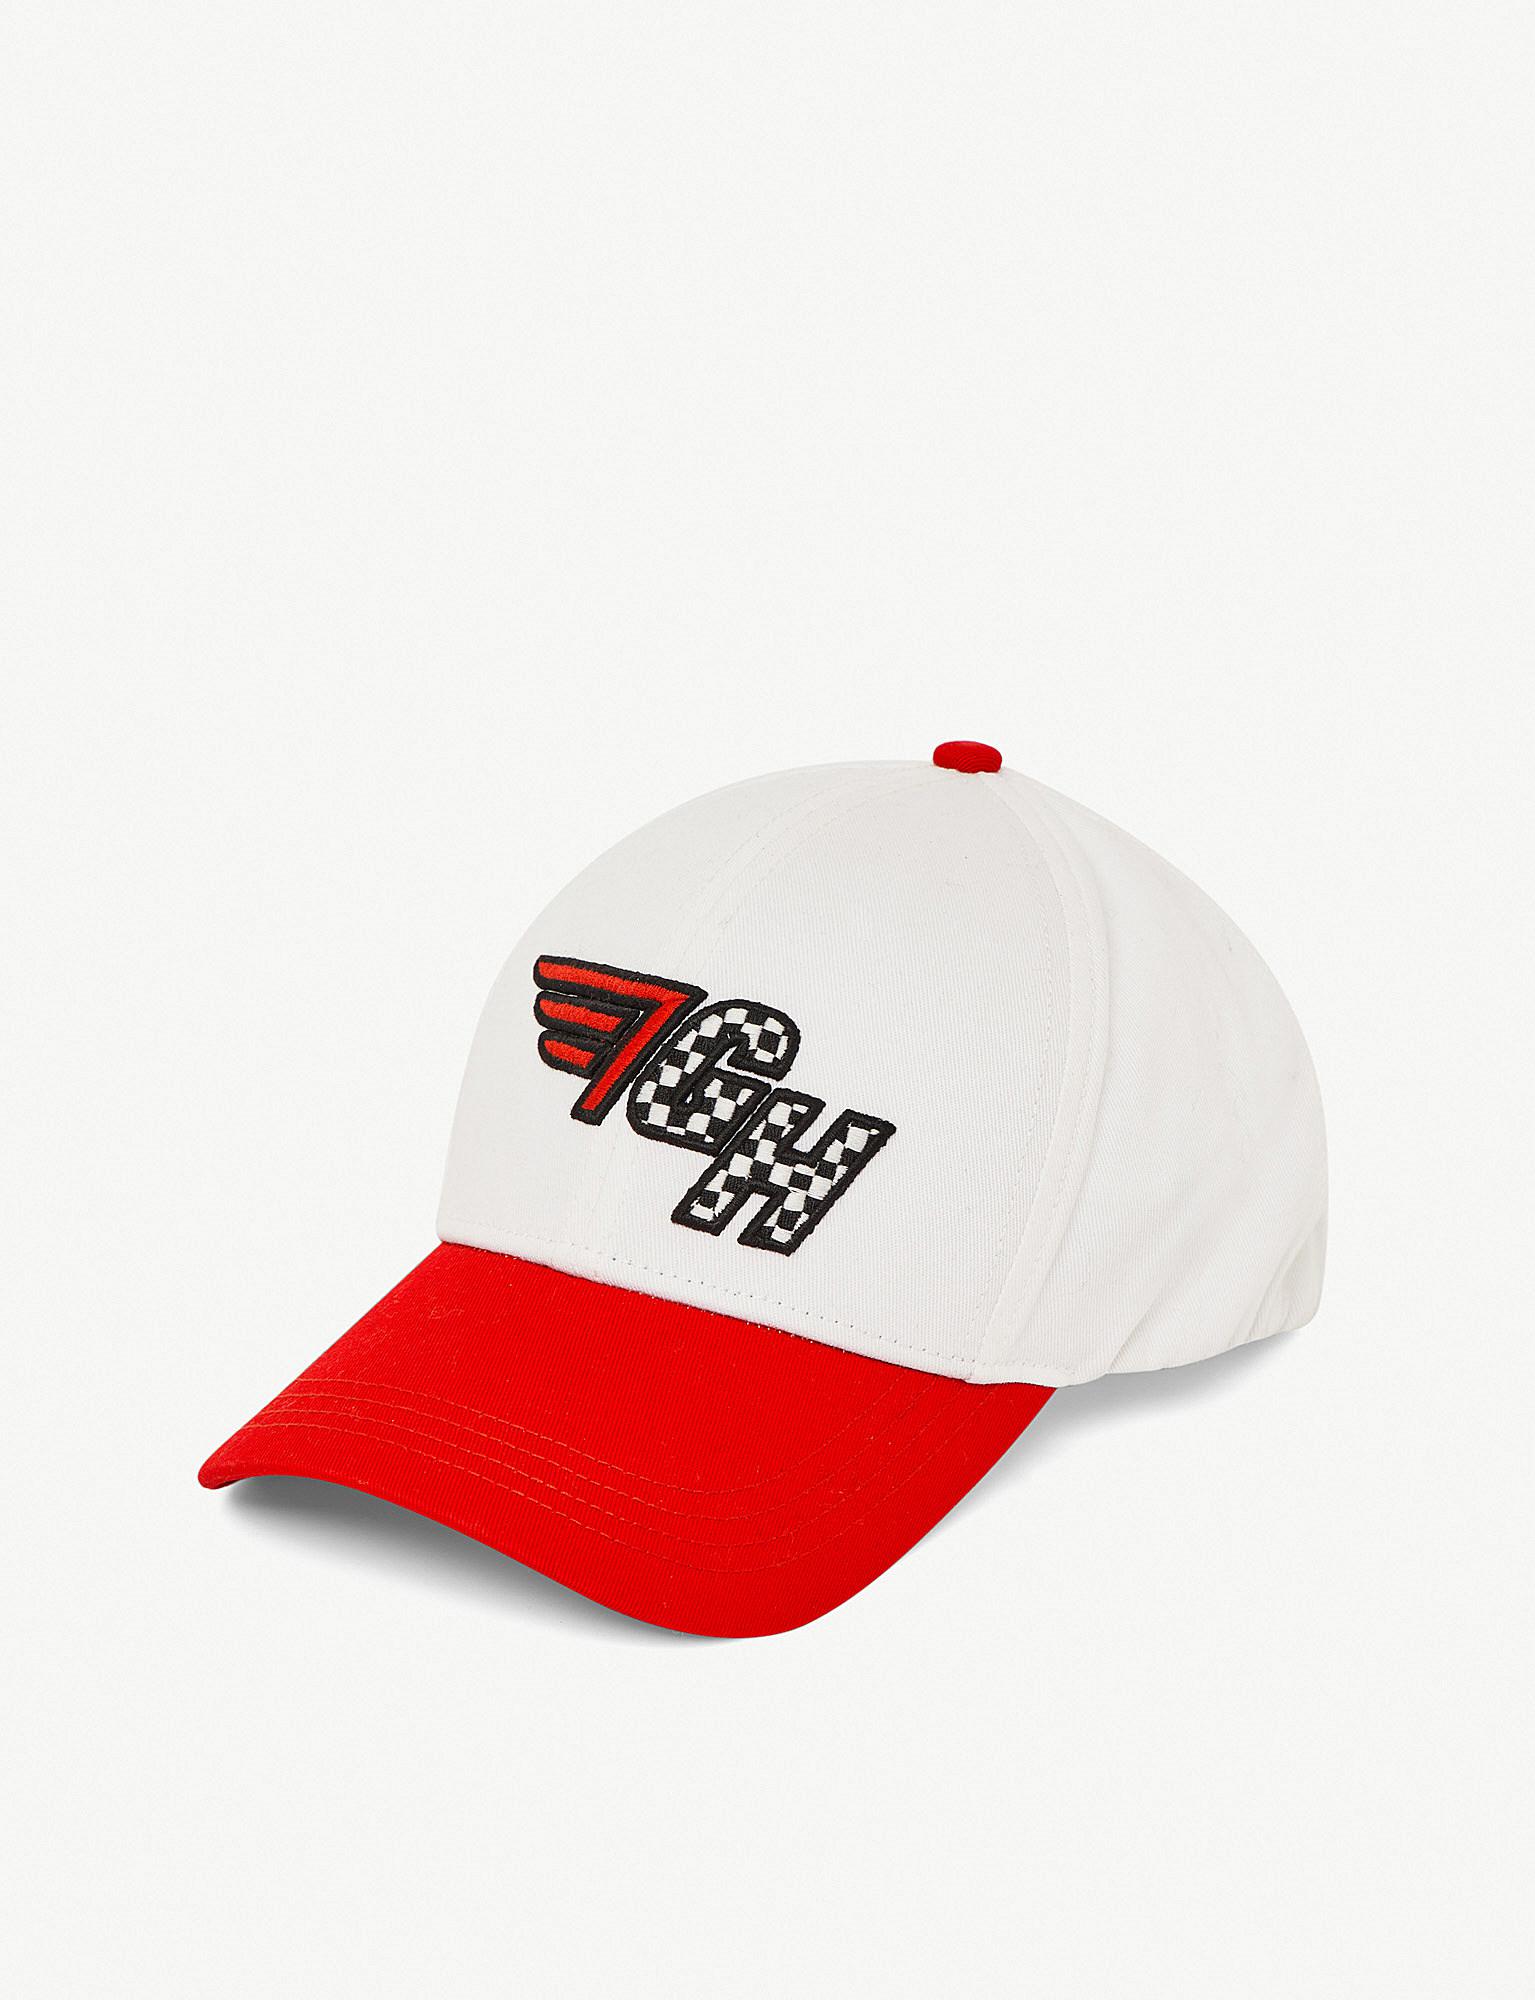 Tommy Hilfiger X Gigi Hadid Baseball Cap in Red-White (Red) for Men - Lyst